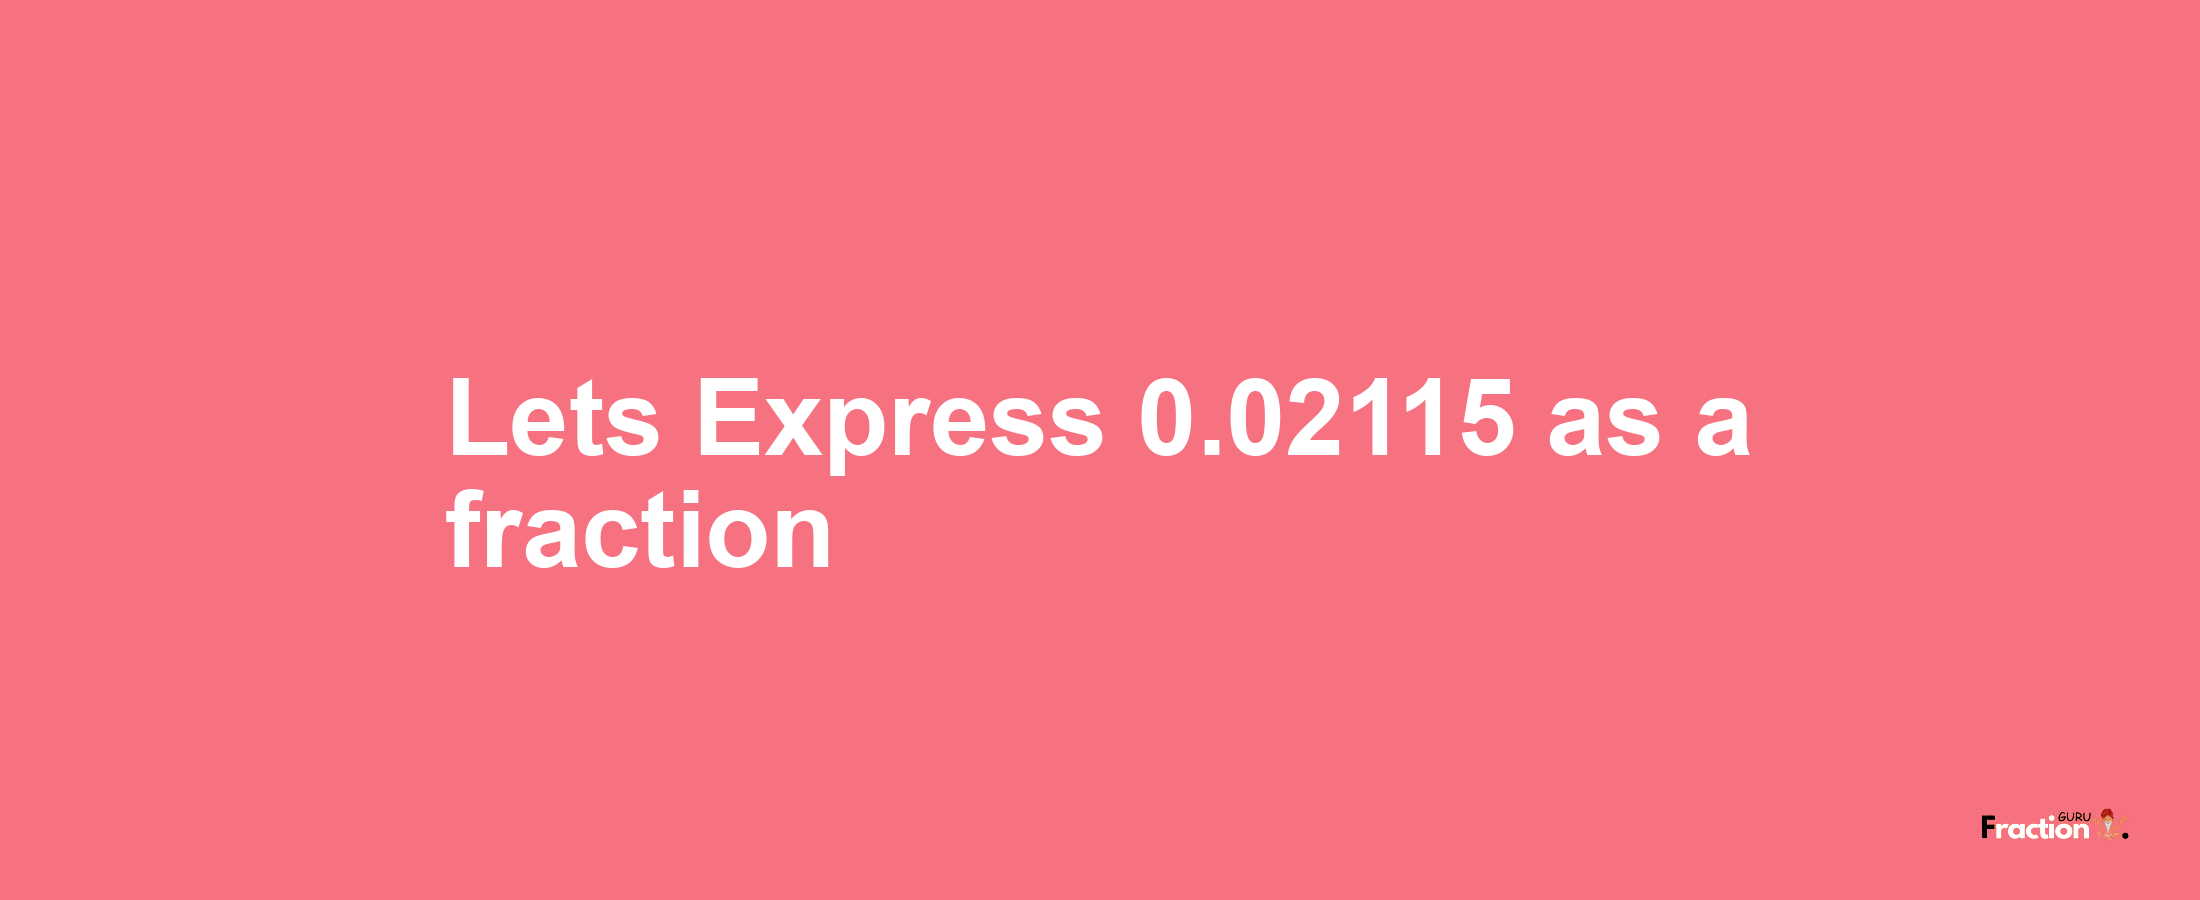 Lets Express 0.02115 as afraction